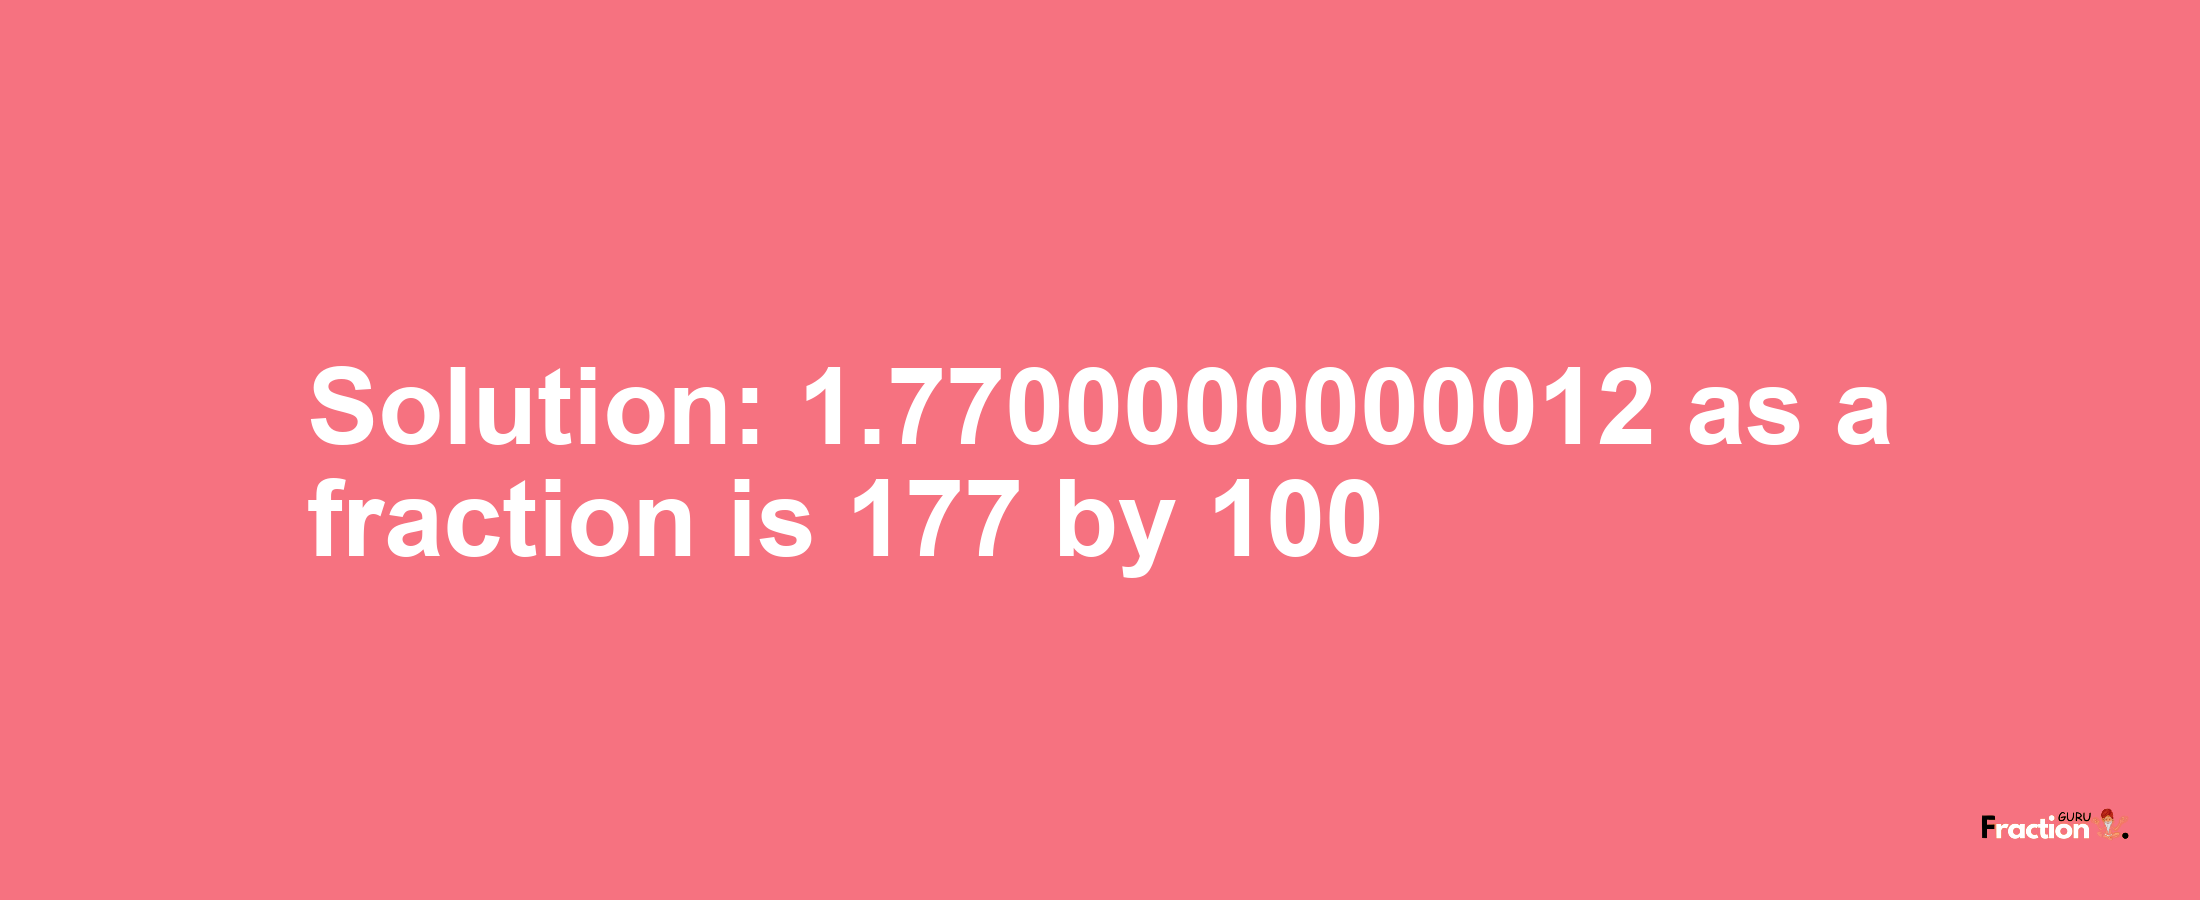 Solution:1.7700000000012 as a fraction is 177/100